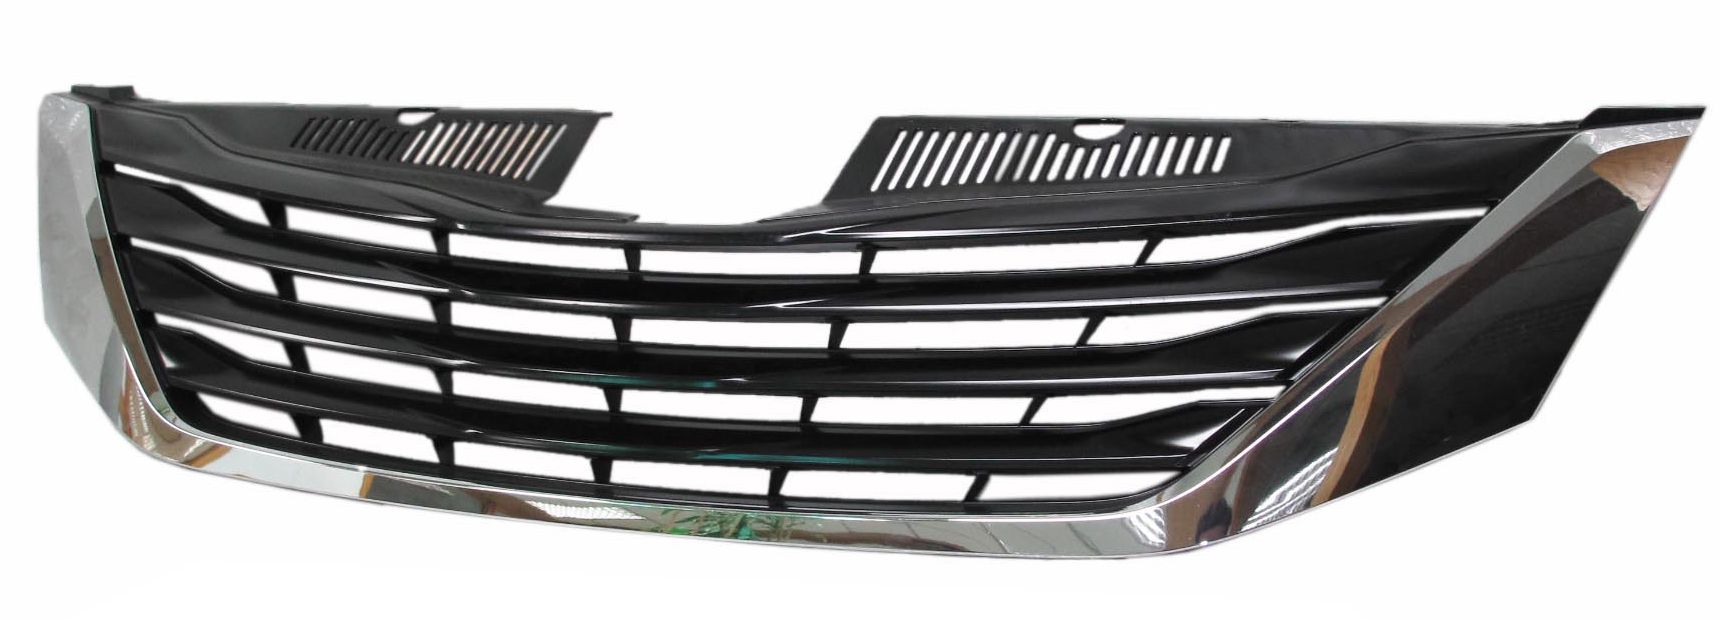 SIENNA 11-17 Grille Assembly Black With Chrome Molding LE